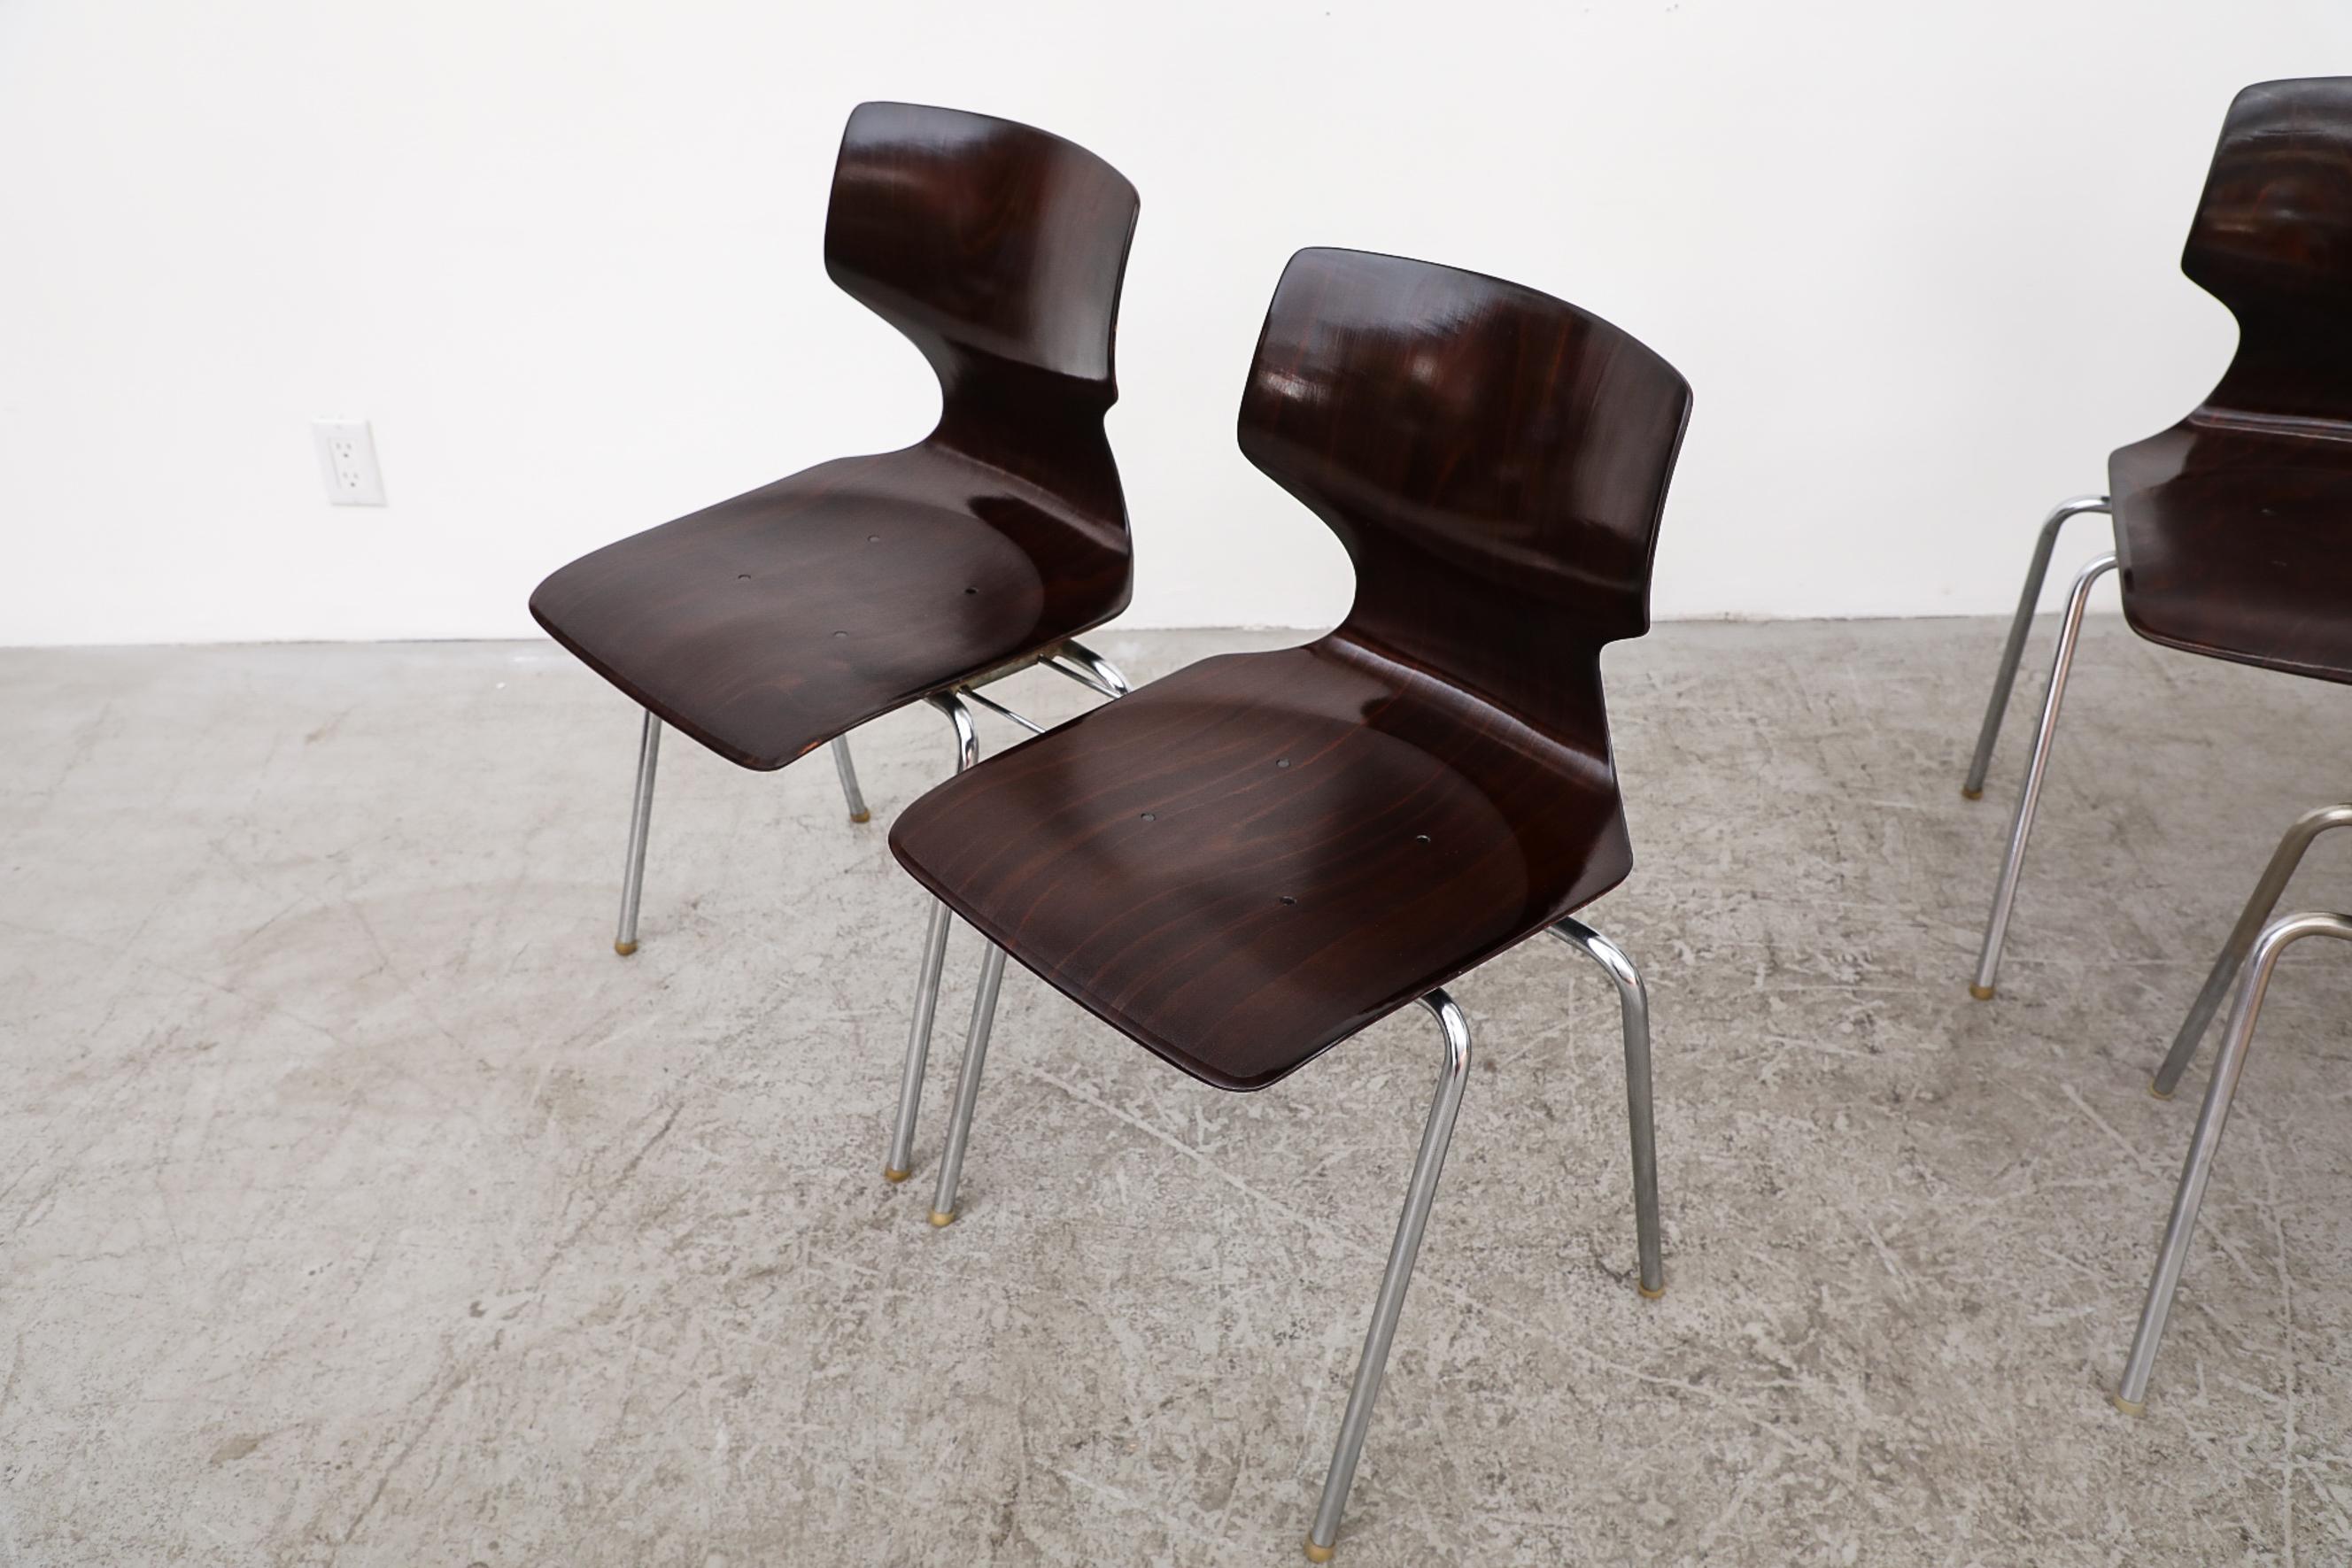 Pagholz Flötotto Dark Brown Wingback Stacking Chairs with Chrome Legs, 1970s For Sale 1